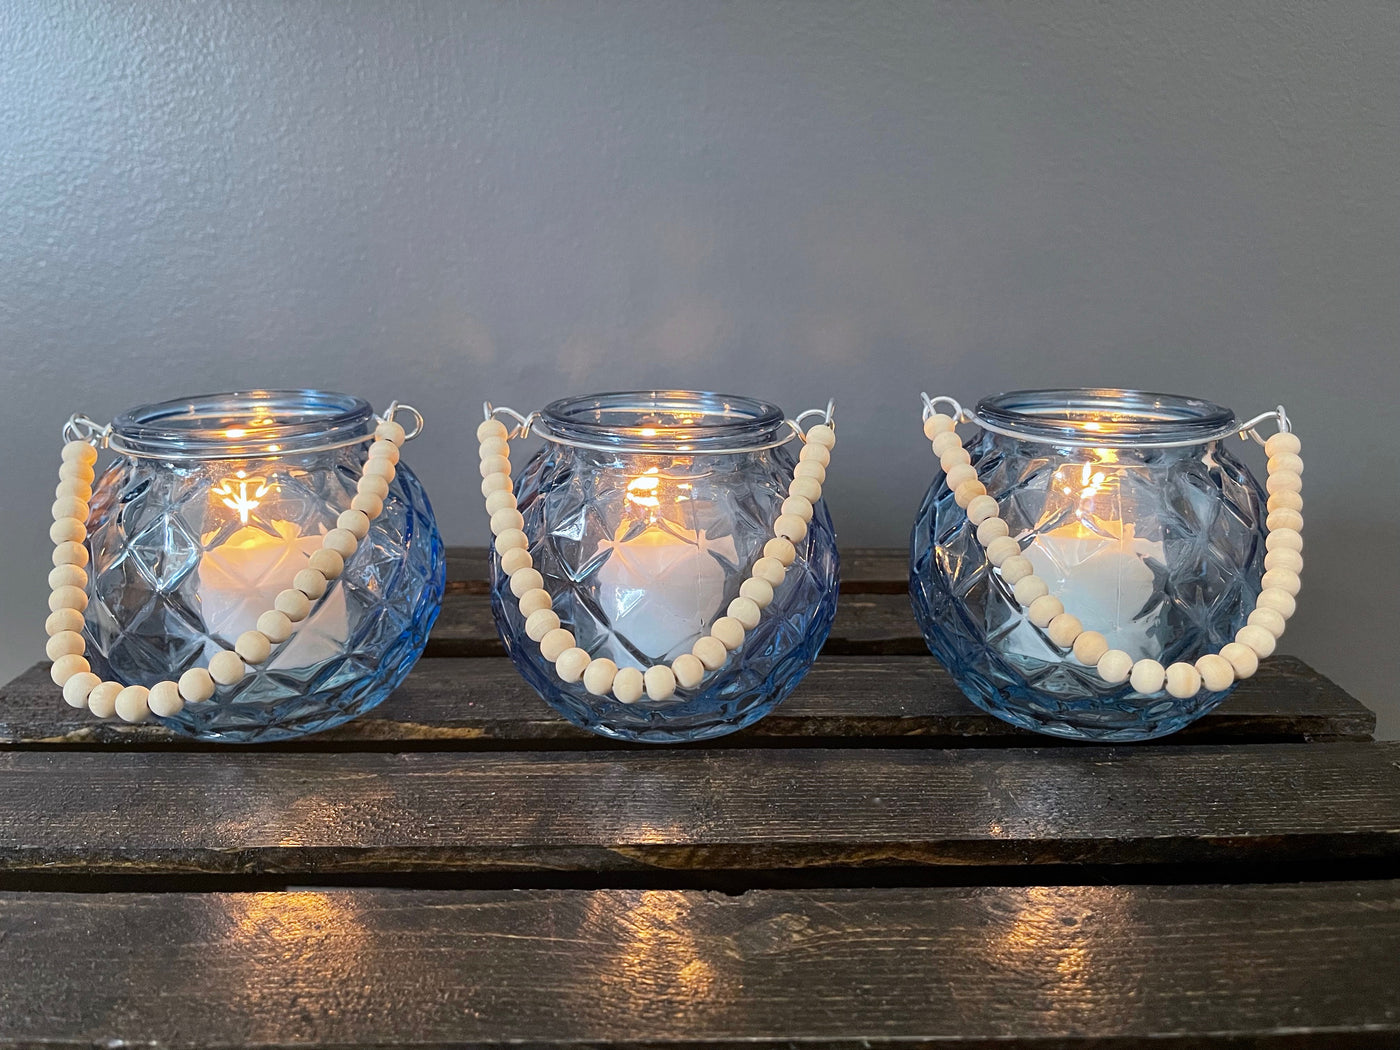 Rent a Rose- Wedding Decor-Adorable diamond patterned blue glass votive with a handle made of wood beads. The price to rent a single votive (that includes a 1 1/2 inch white candle) is $3.00. 